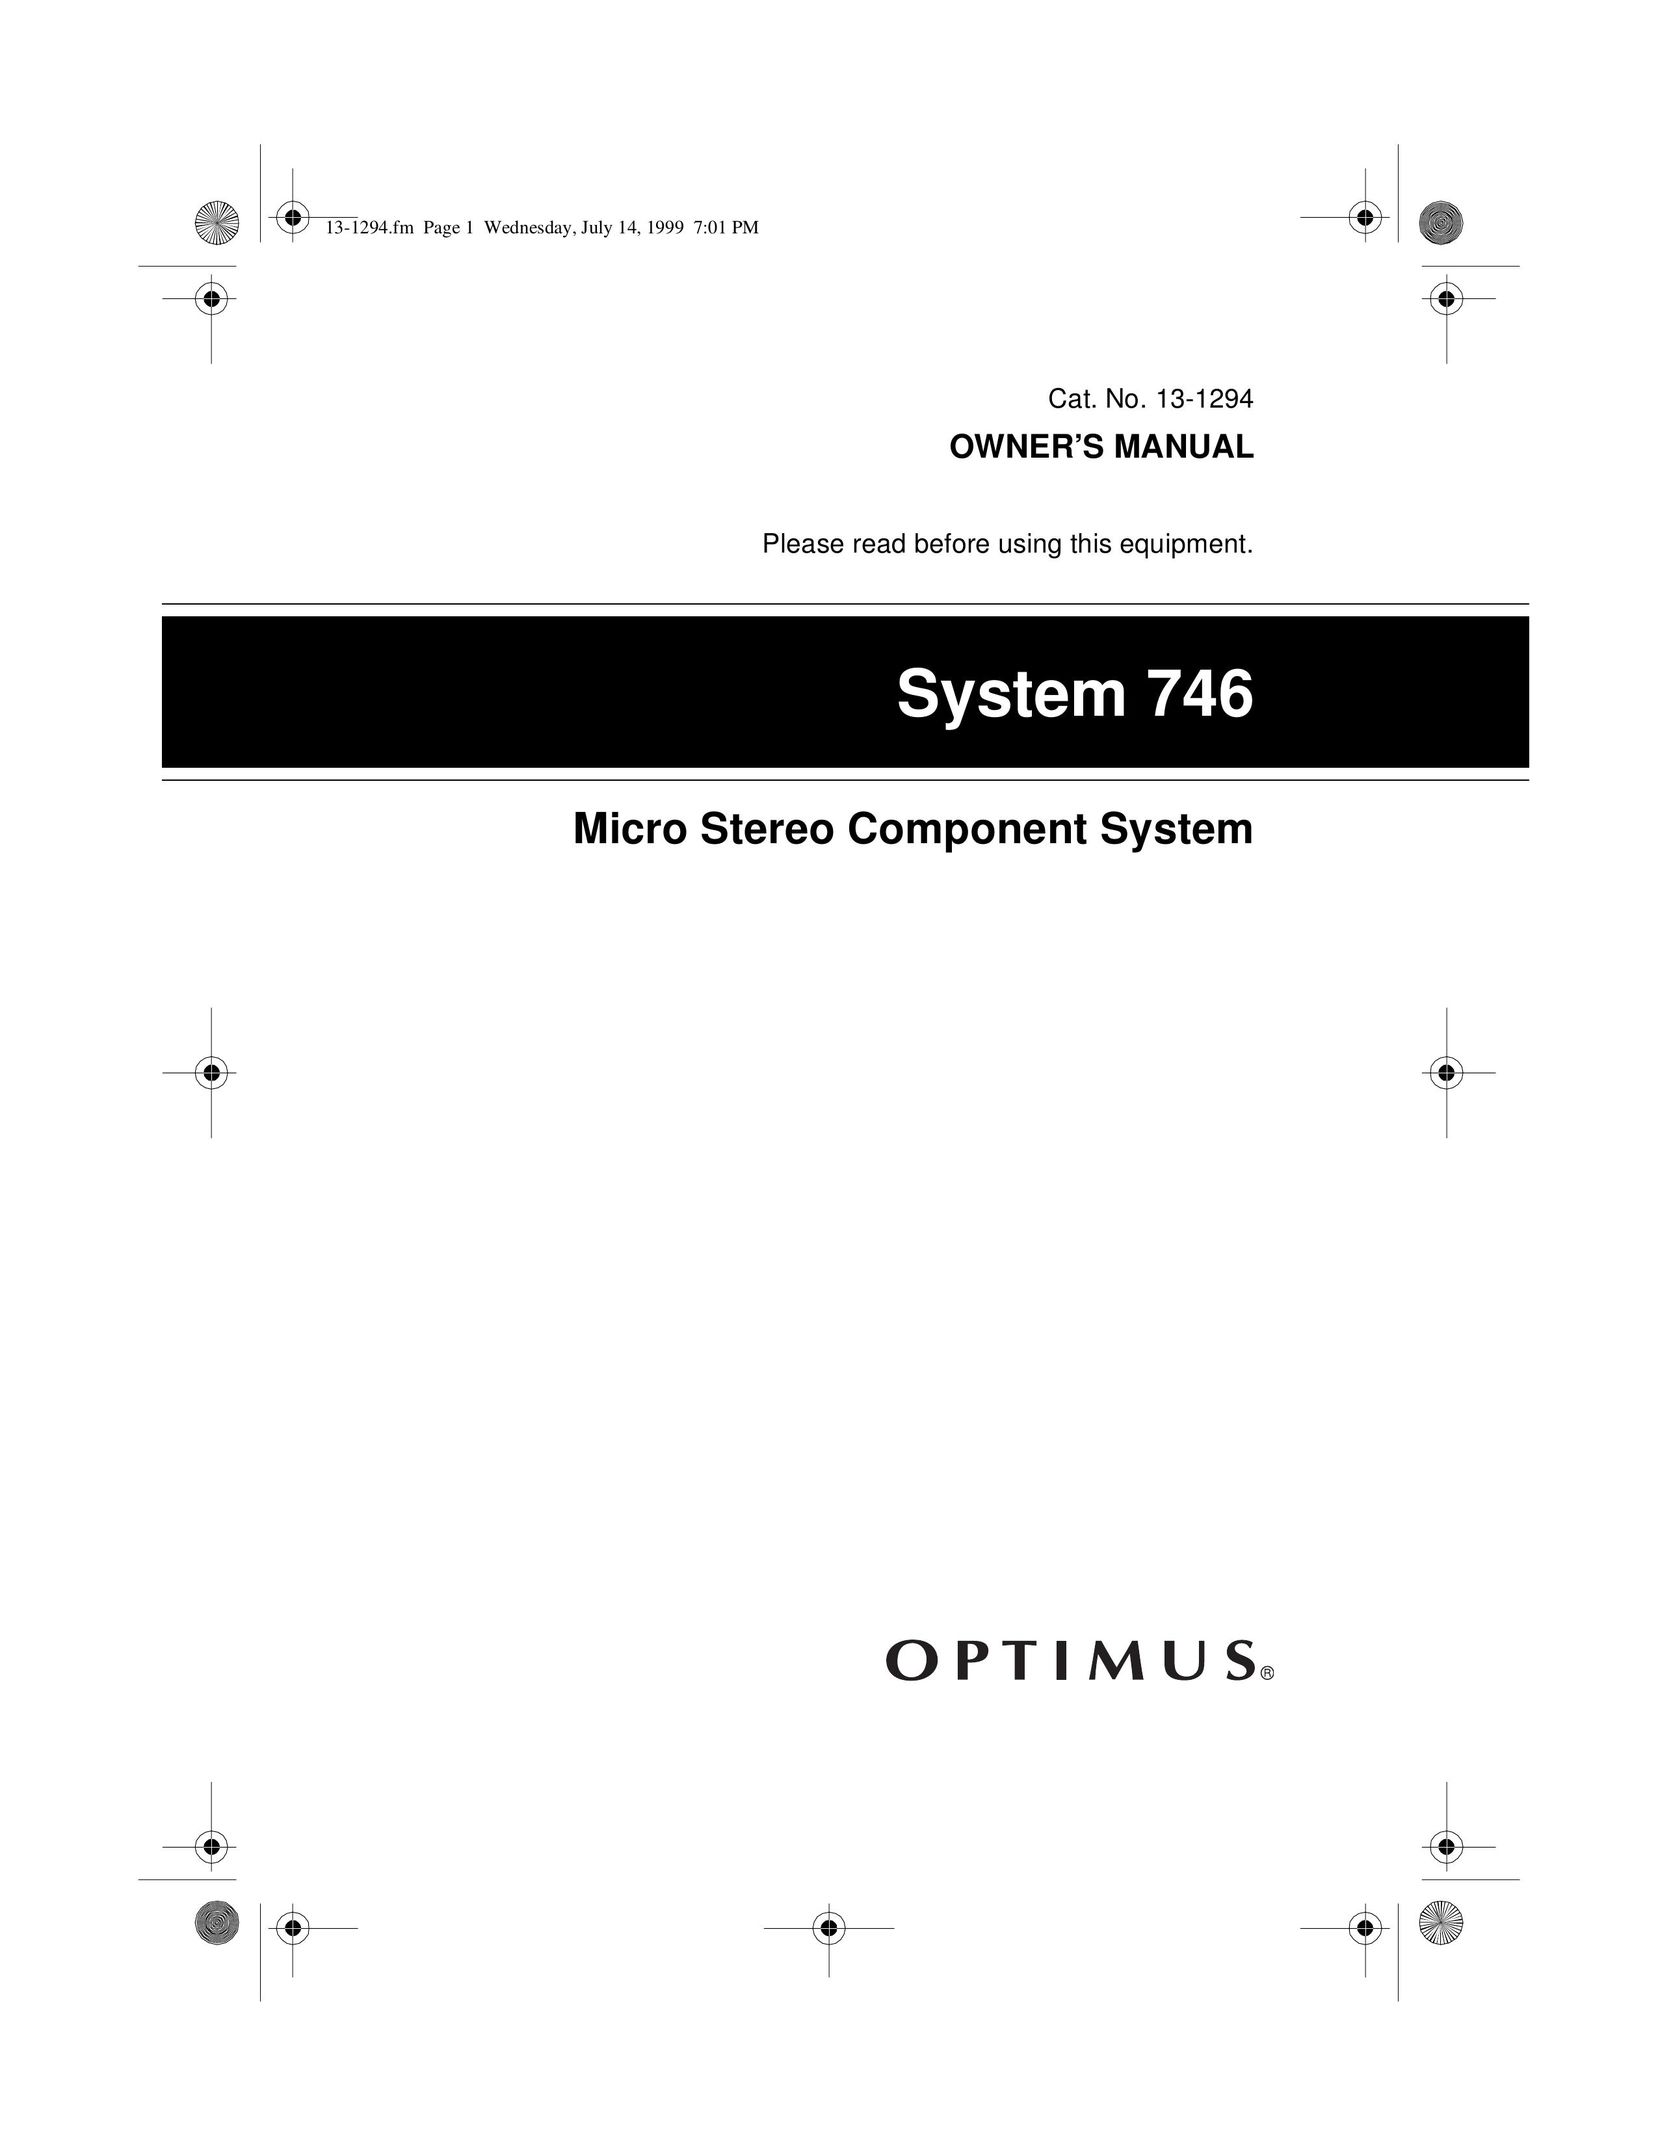 Optimus SYSTEM 746 Home Theater System User Manual